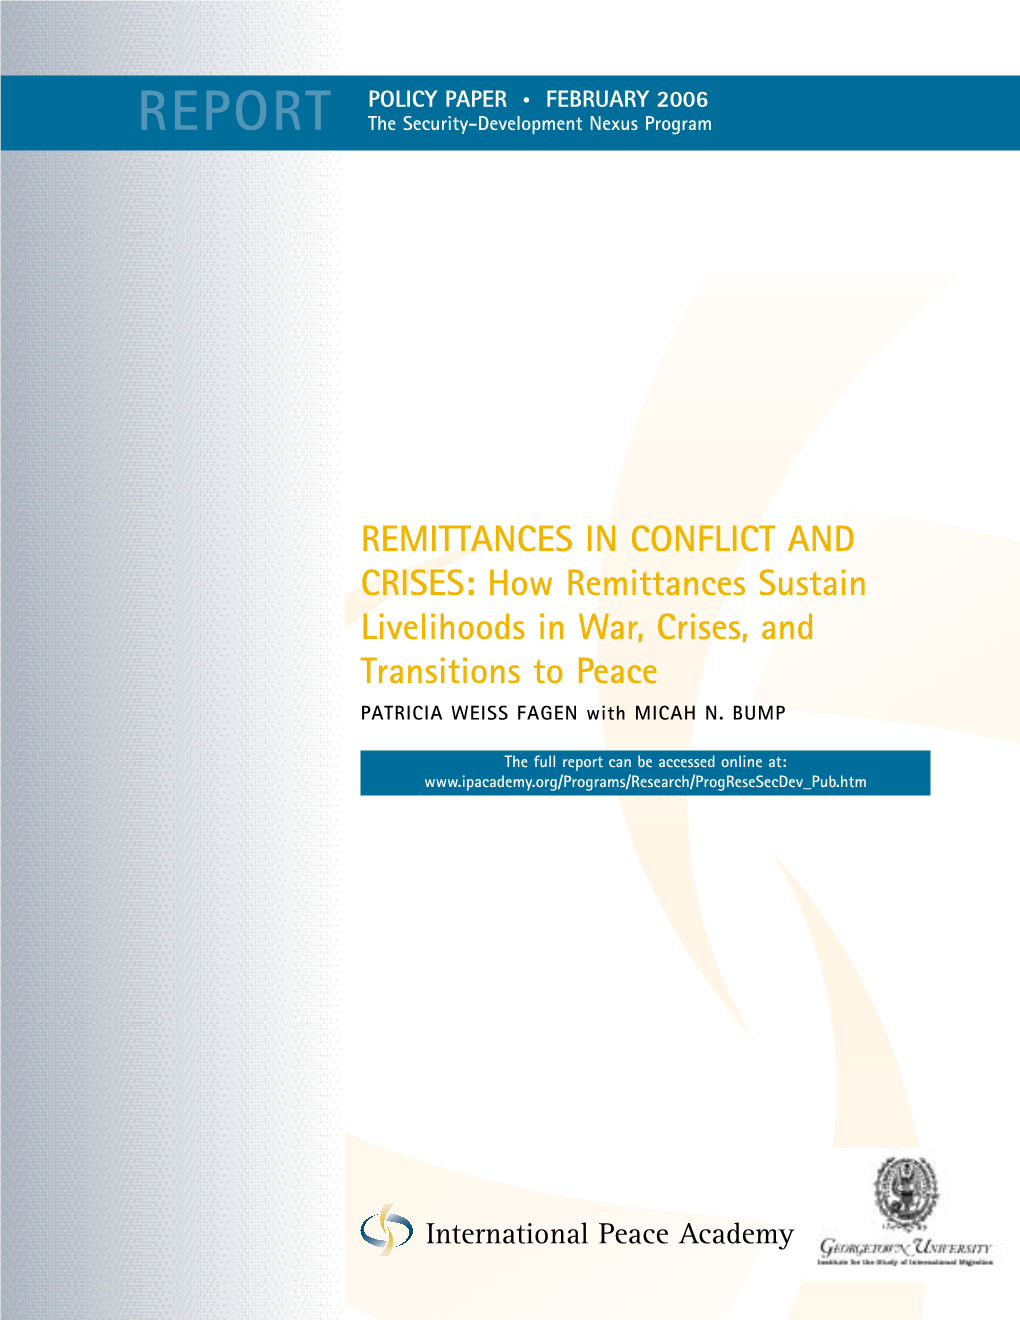 REMITTANCES in CONFLICT and CRISES: How Remittances Sustain Livelihoods in War, Crises, and Transitions to Peace PATRICIA WEISS FAGEN with MICAH N